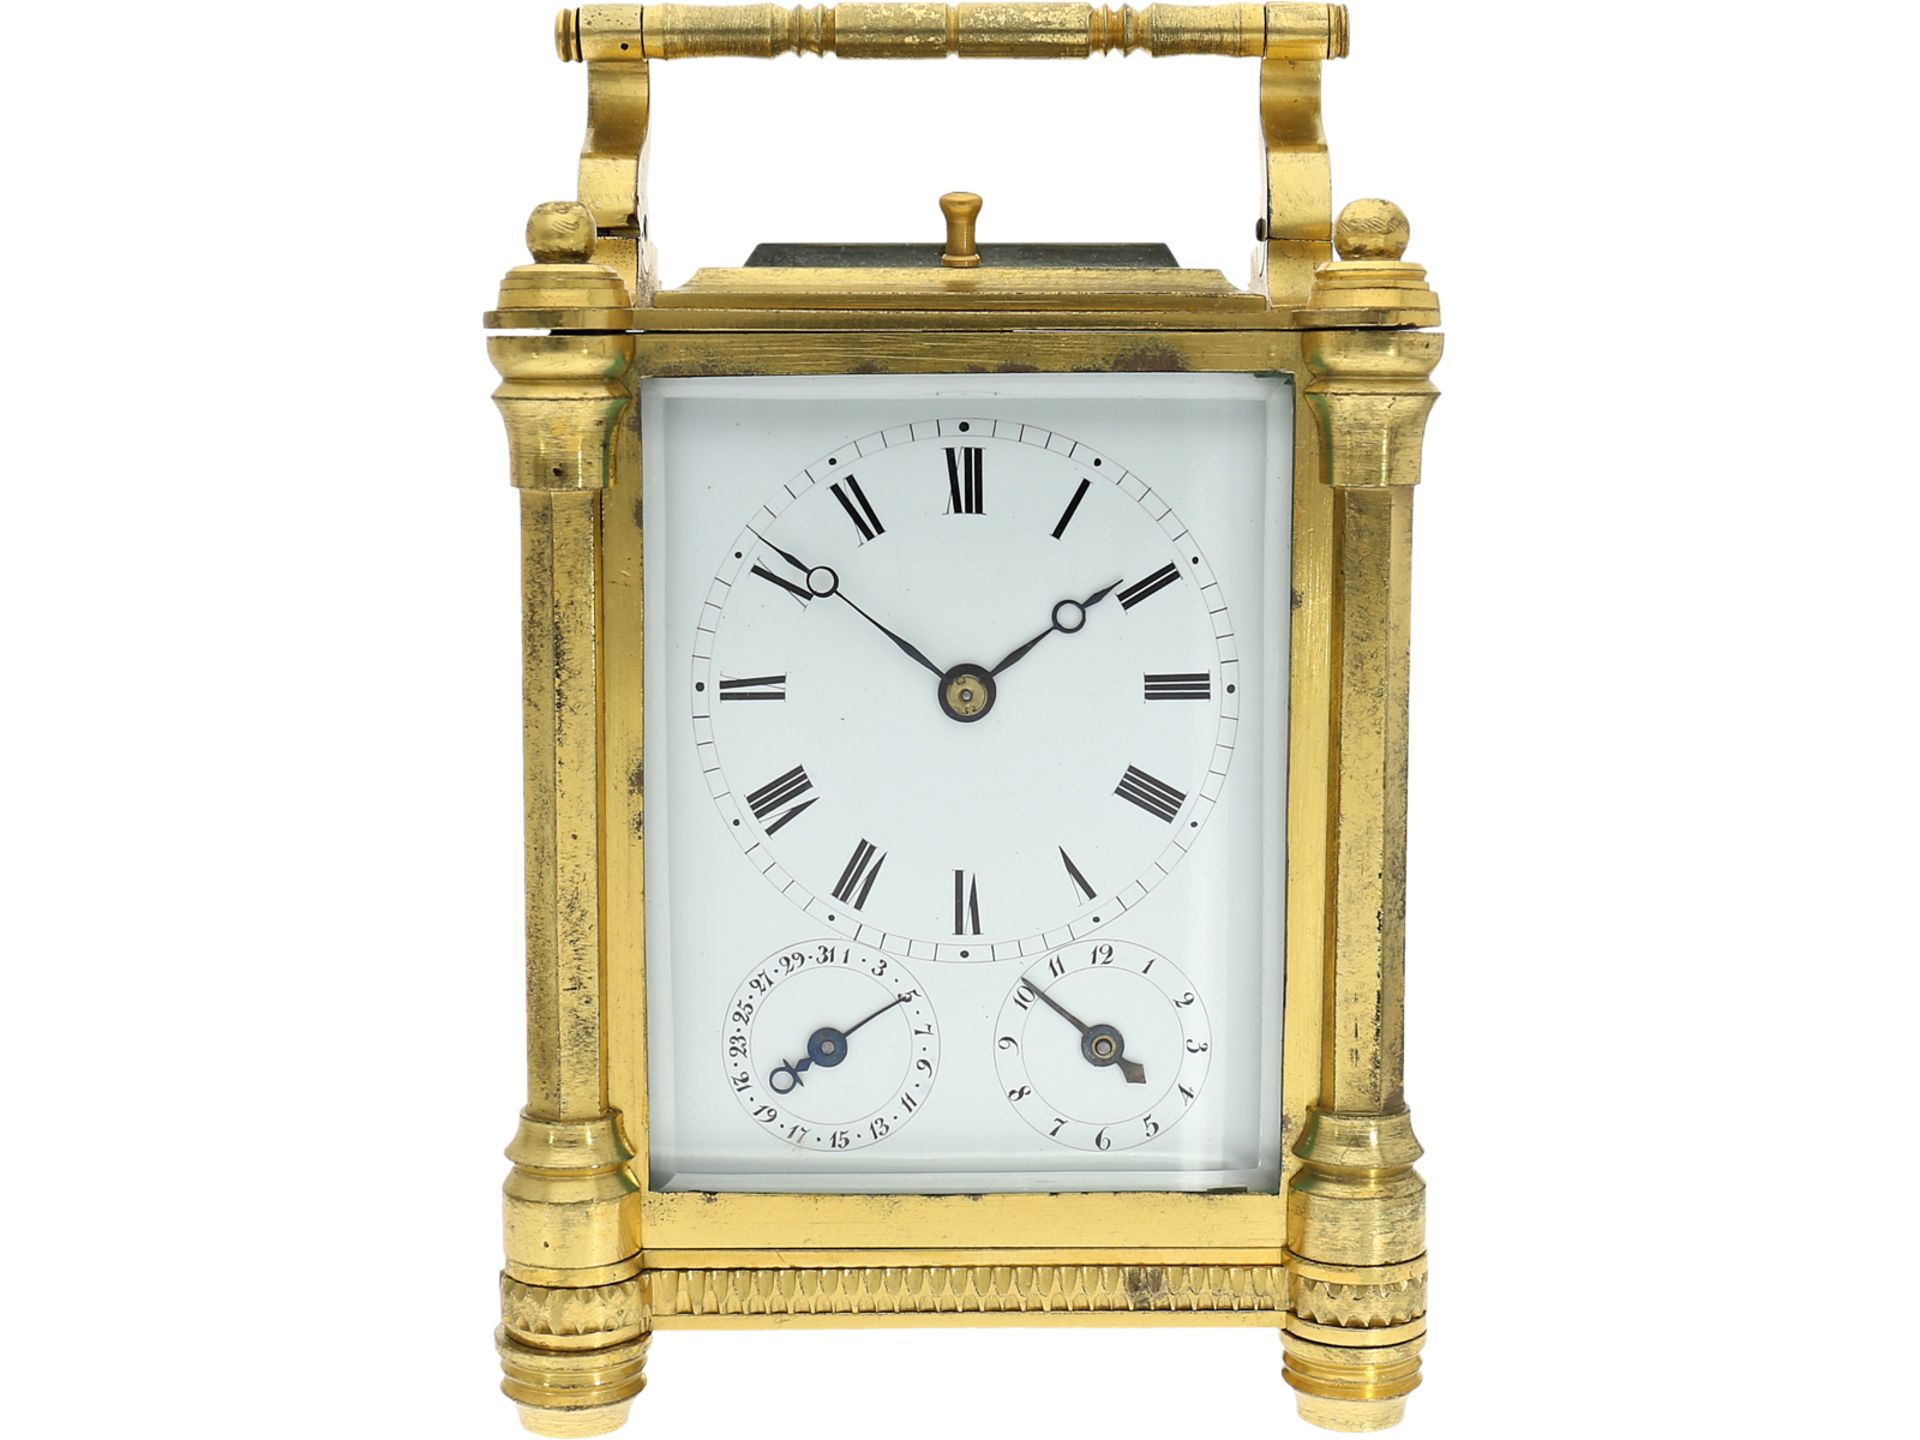 Travel clock: highly complicated, technically interesting travel clock with 4 complications, 19th ce